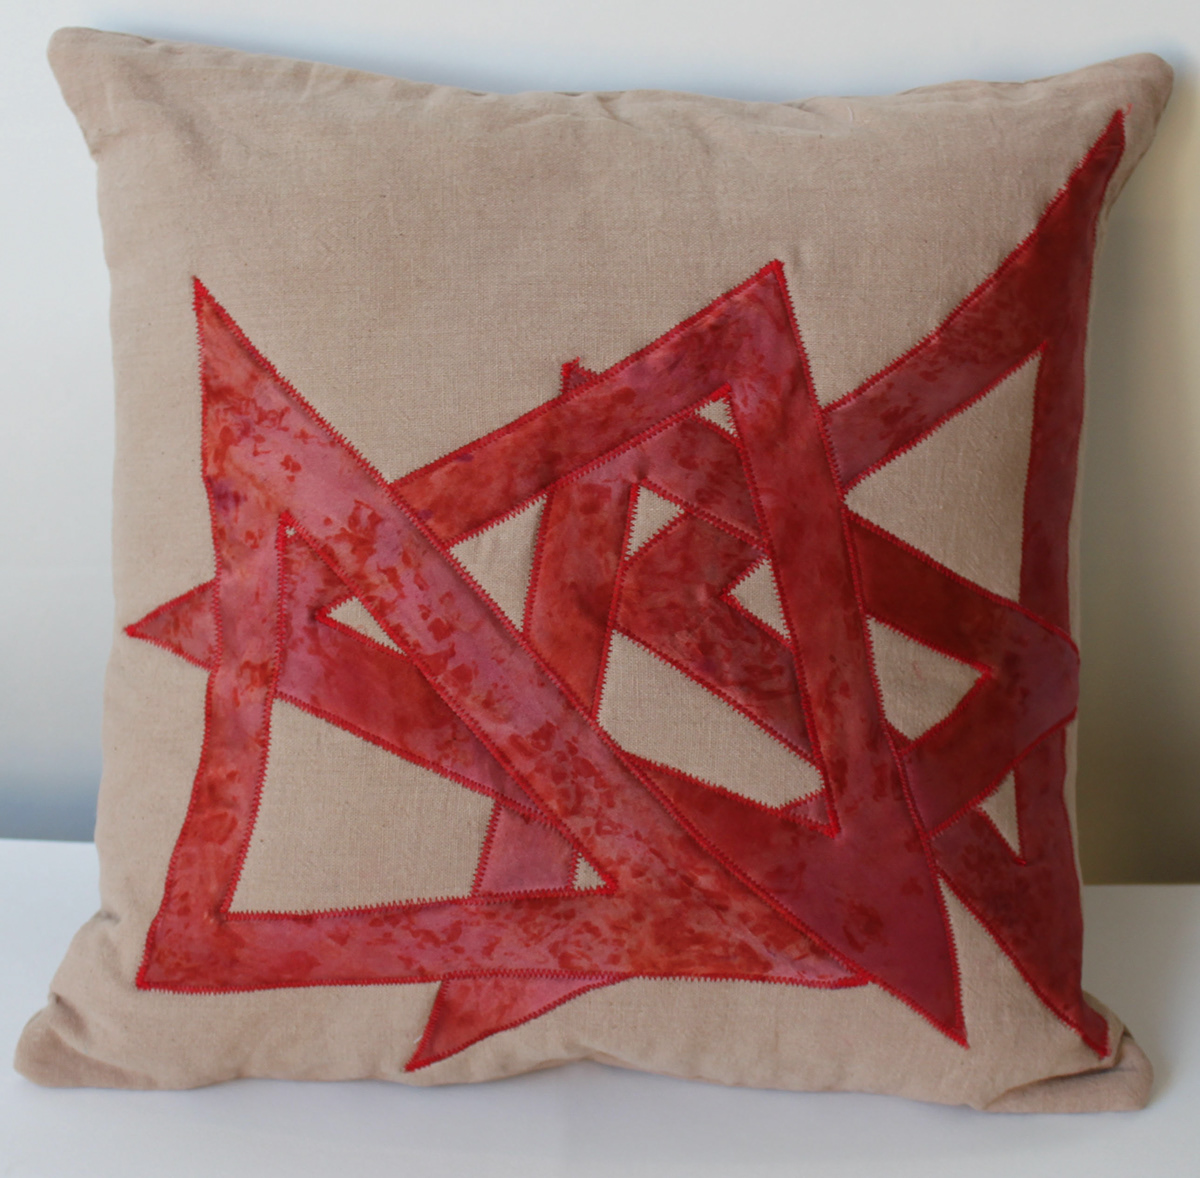 pillow natural dyes tea dye Madder Root donkey cotton SILK applique quilting free motion embroidery home decor Rustic Decor cabin decor throw pillow